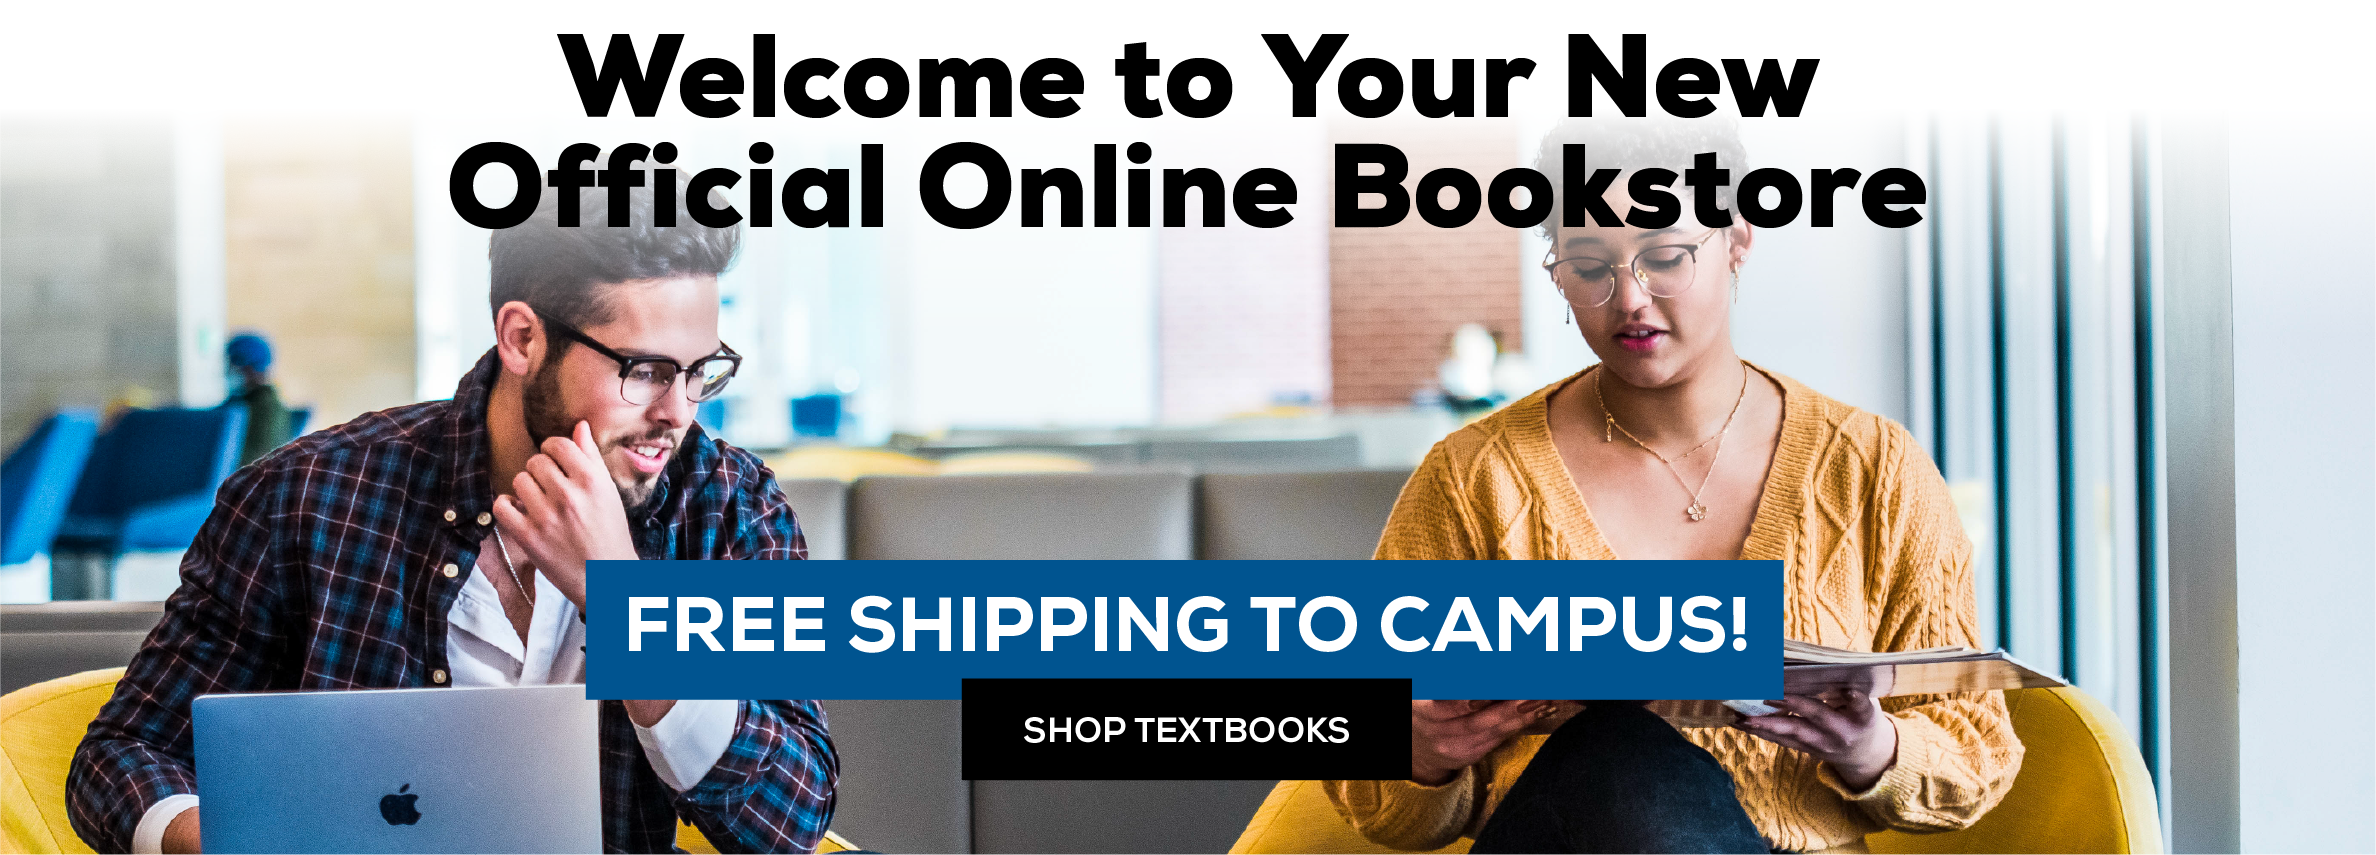 Welcome to Your Official Online Bookstore. Free shipping to campus. Shop textbooks